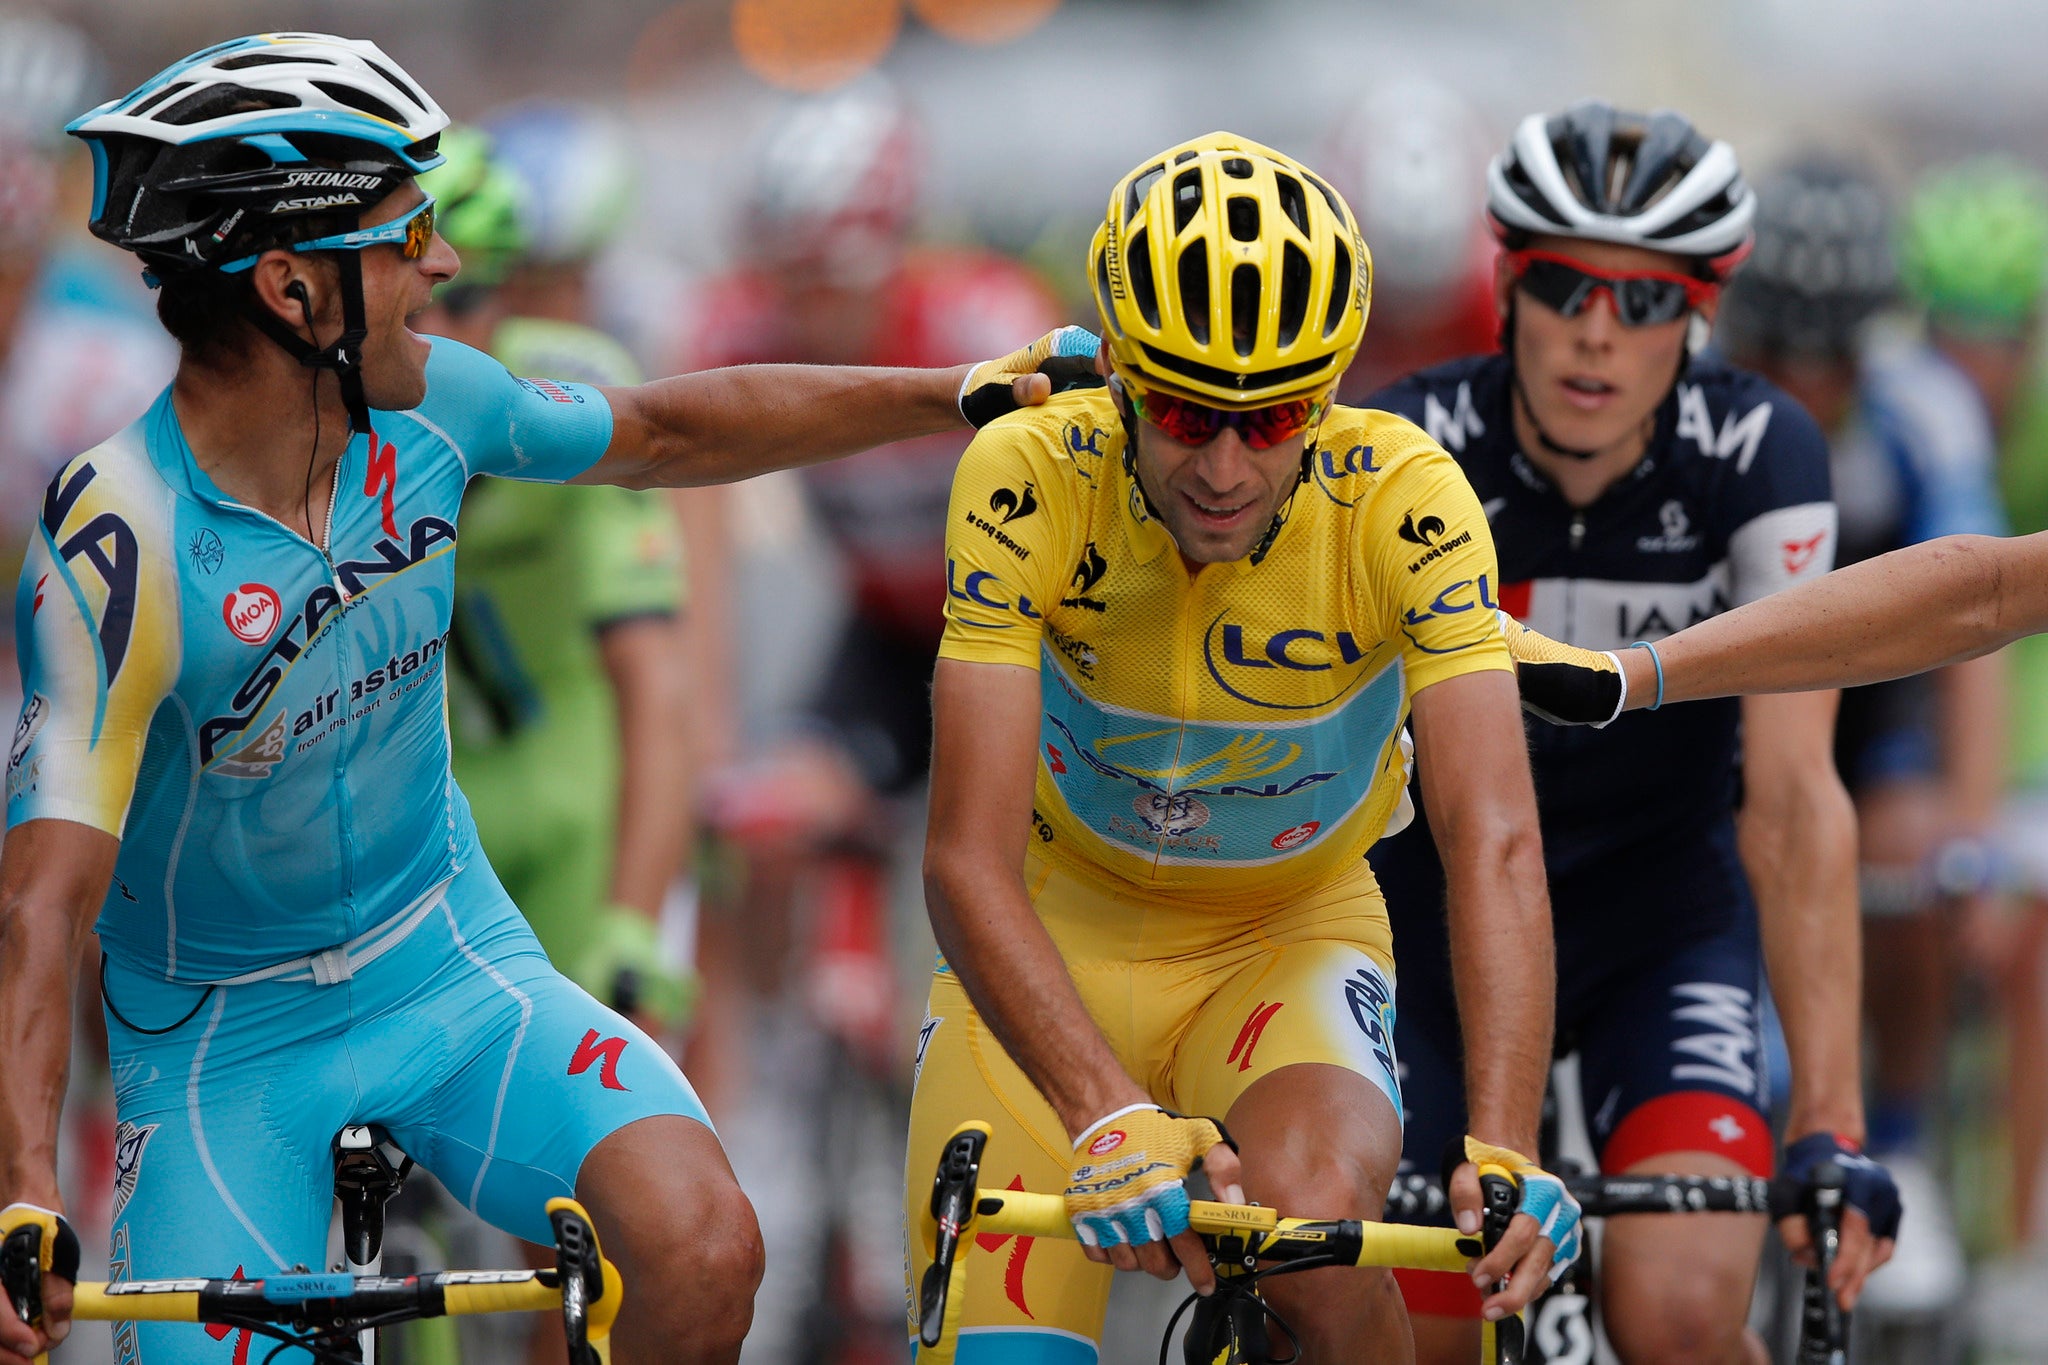 Italy's Vincenzo Nibali, wearing the overall leader's yellow jersey, is congratulated by teammates as he crosses the finish line of the final stage of the Tour de France